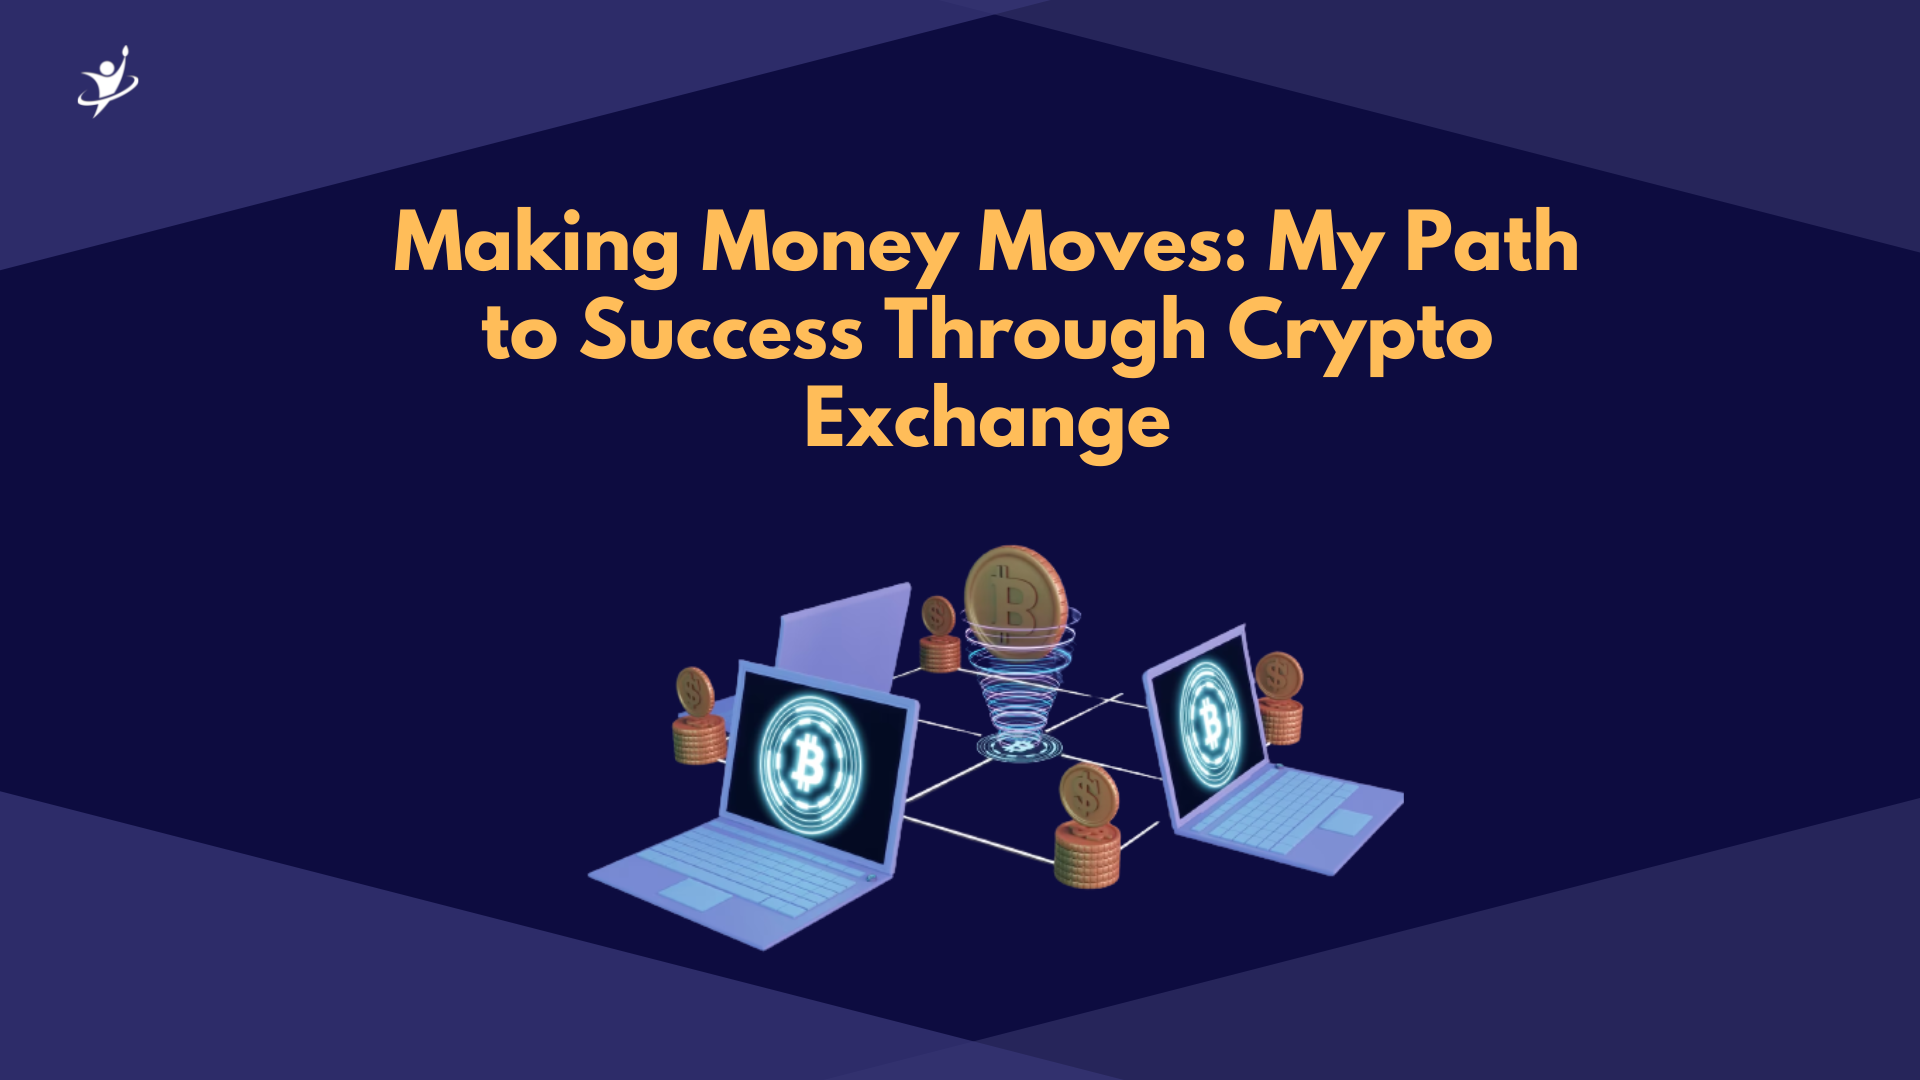 Making Money Moves: My Path to Success Through Crypto Exchange